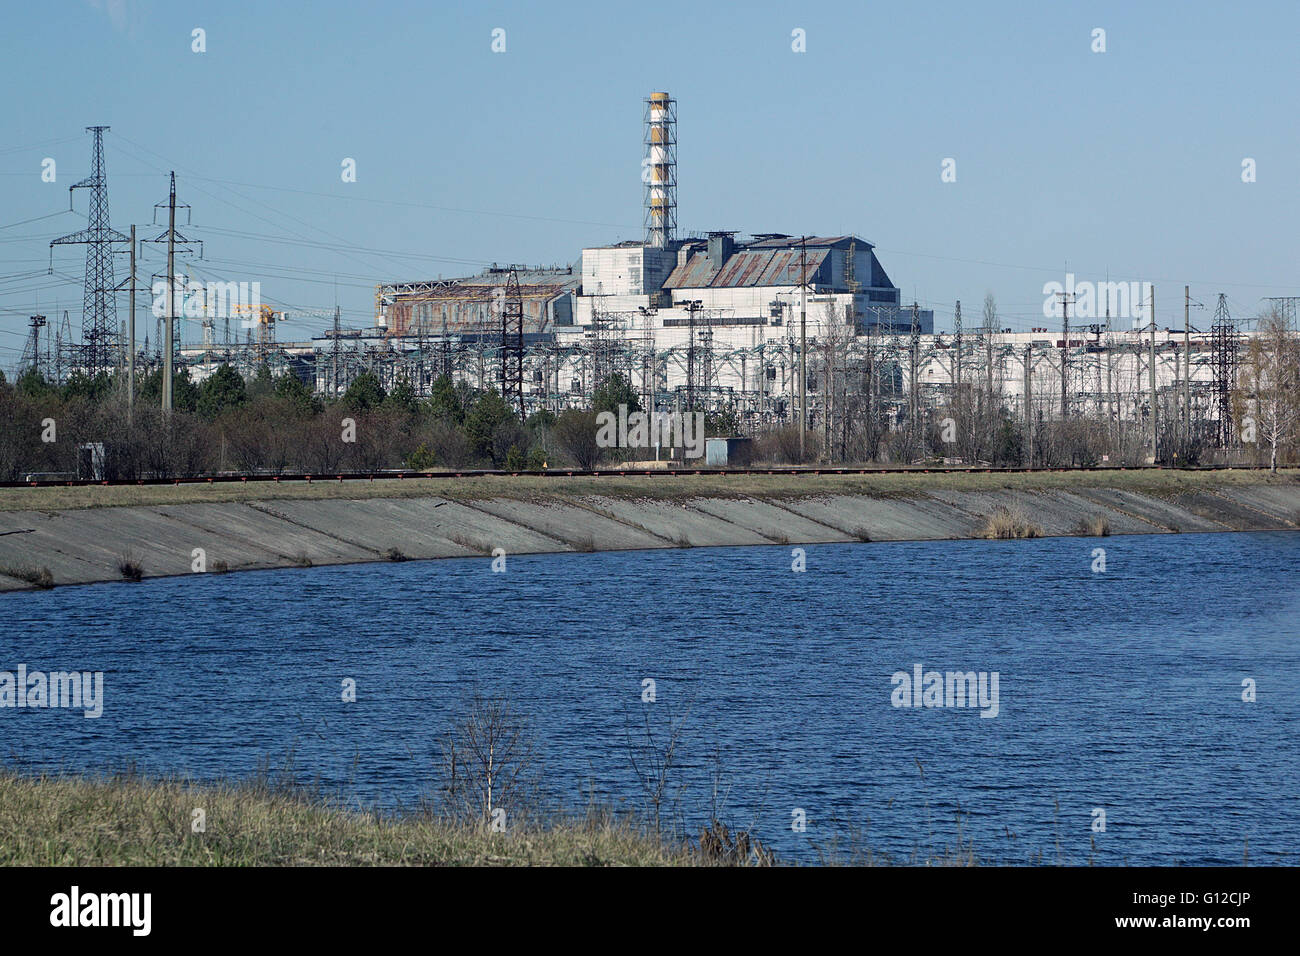 River Pripyat, Chernobyl - Nuclear Power Plant - Wrecked Reactor 4 (Left) - Intact Reactor 3 (Right). Stock Photo